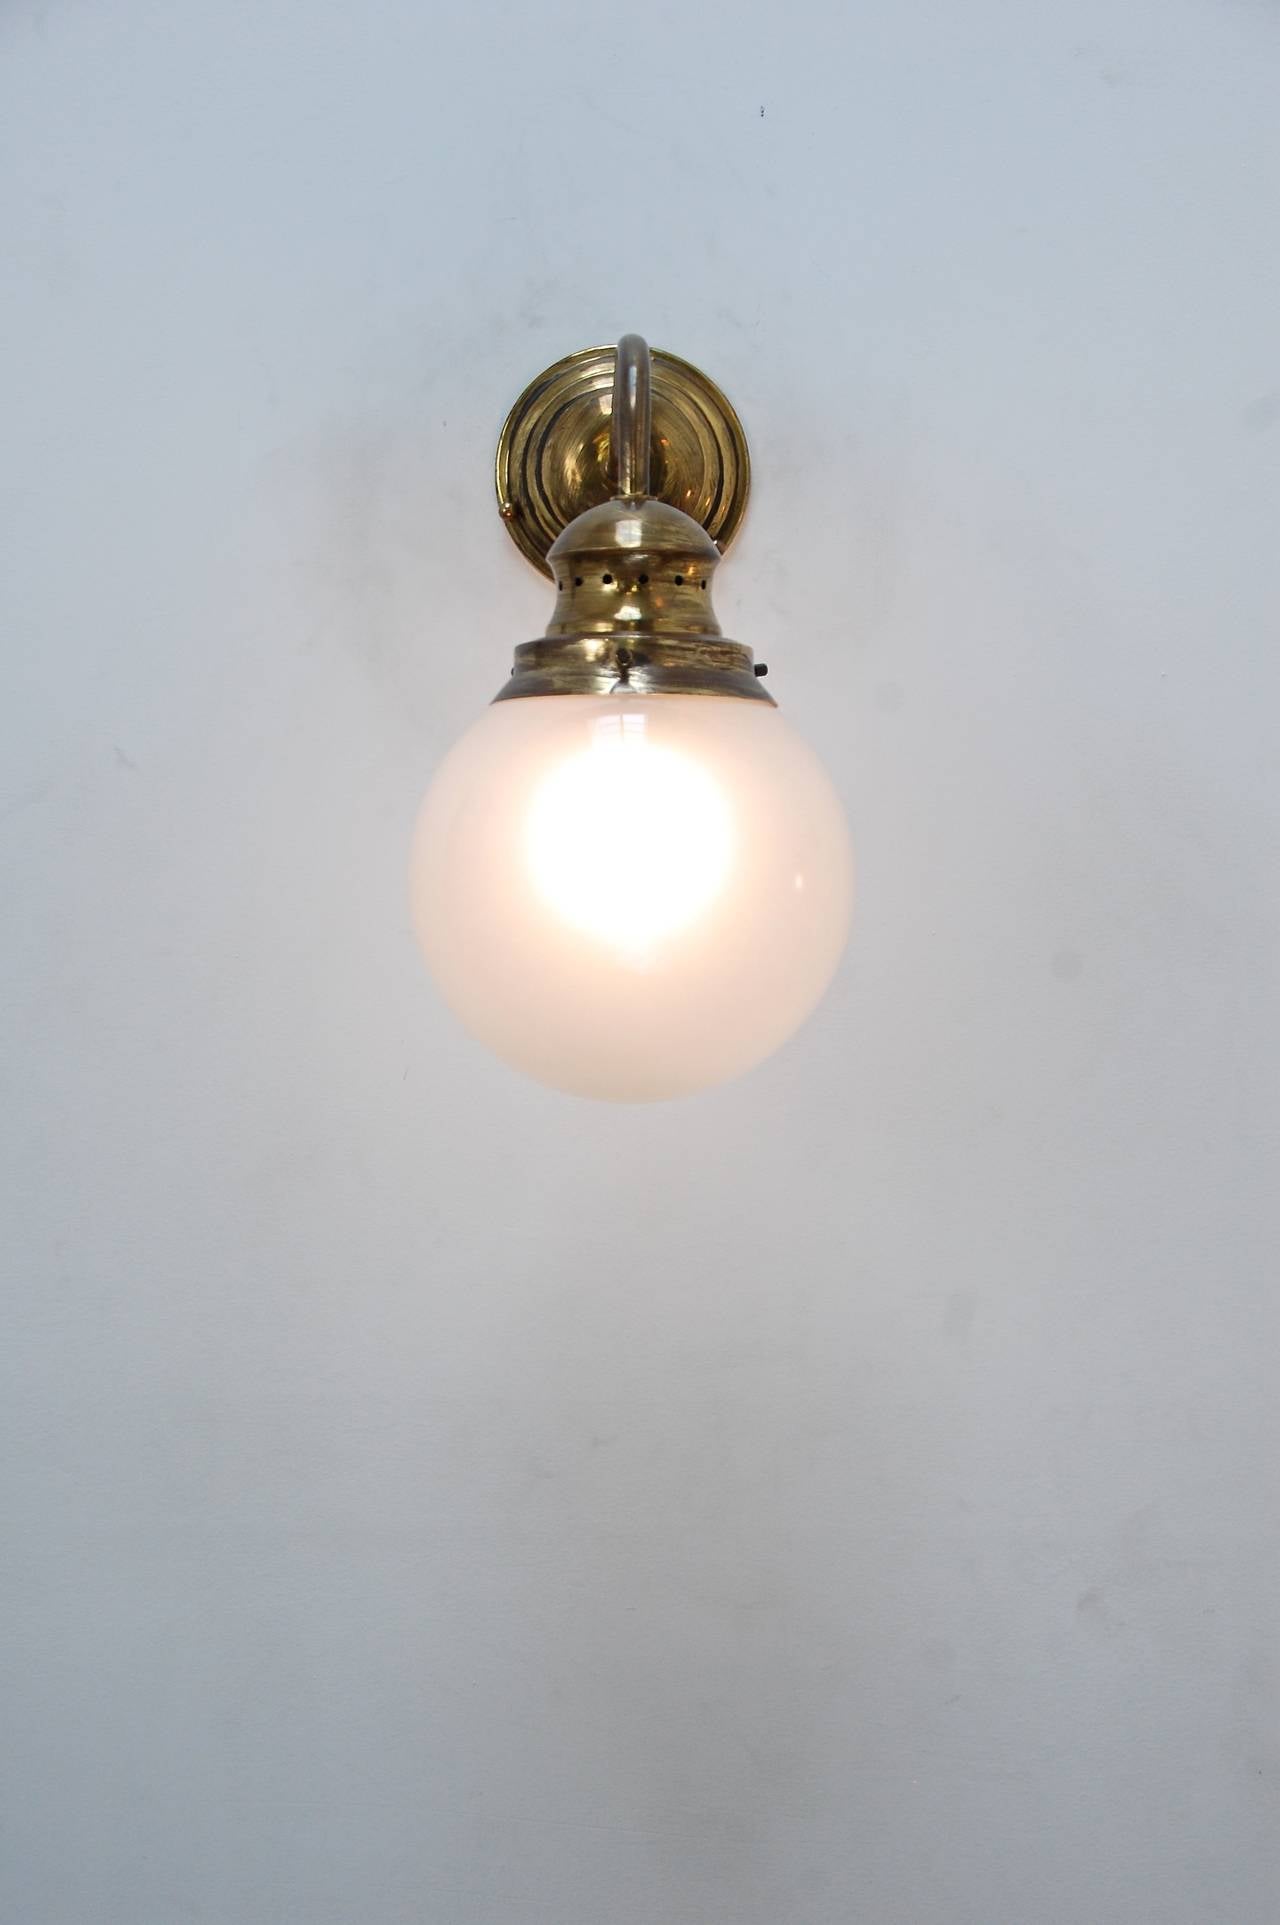 (Five) Italian wall lights designed by Luigi Caccia Dominioni for Azucena in naturally aged and glass globe frosted inside. 

We are aware that they are commonly used in a reversed position than what is displayed.

Priced per sconce: $1200.